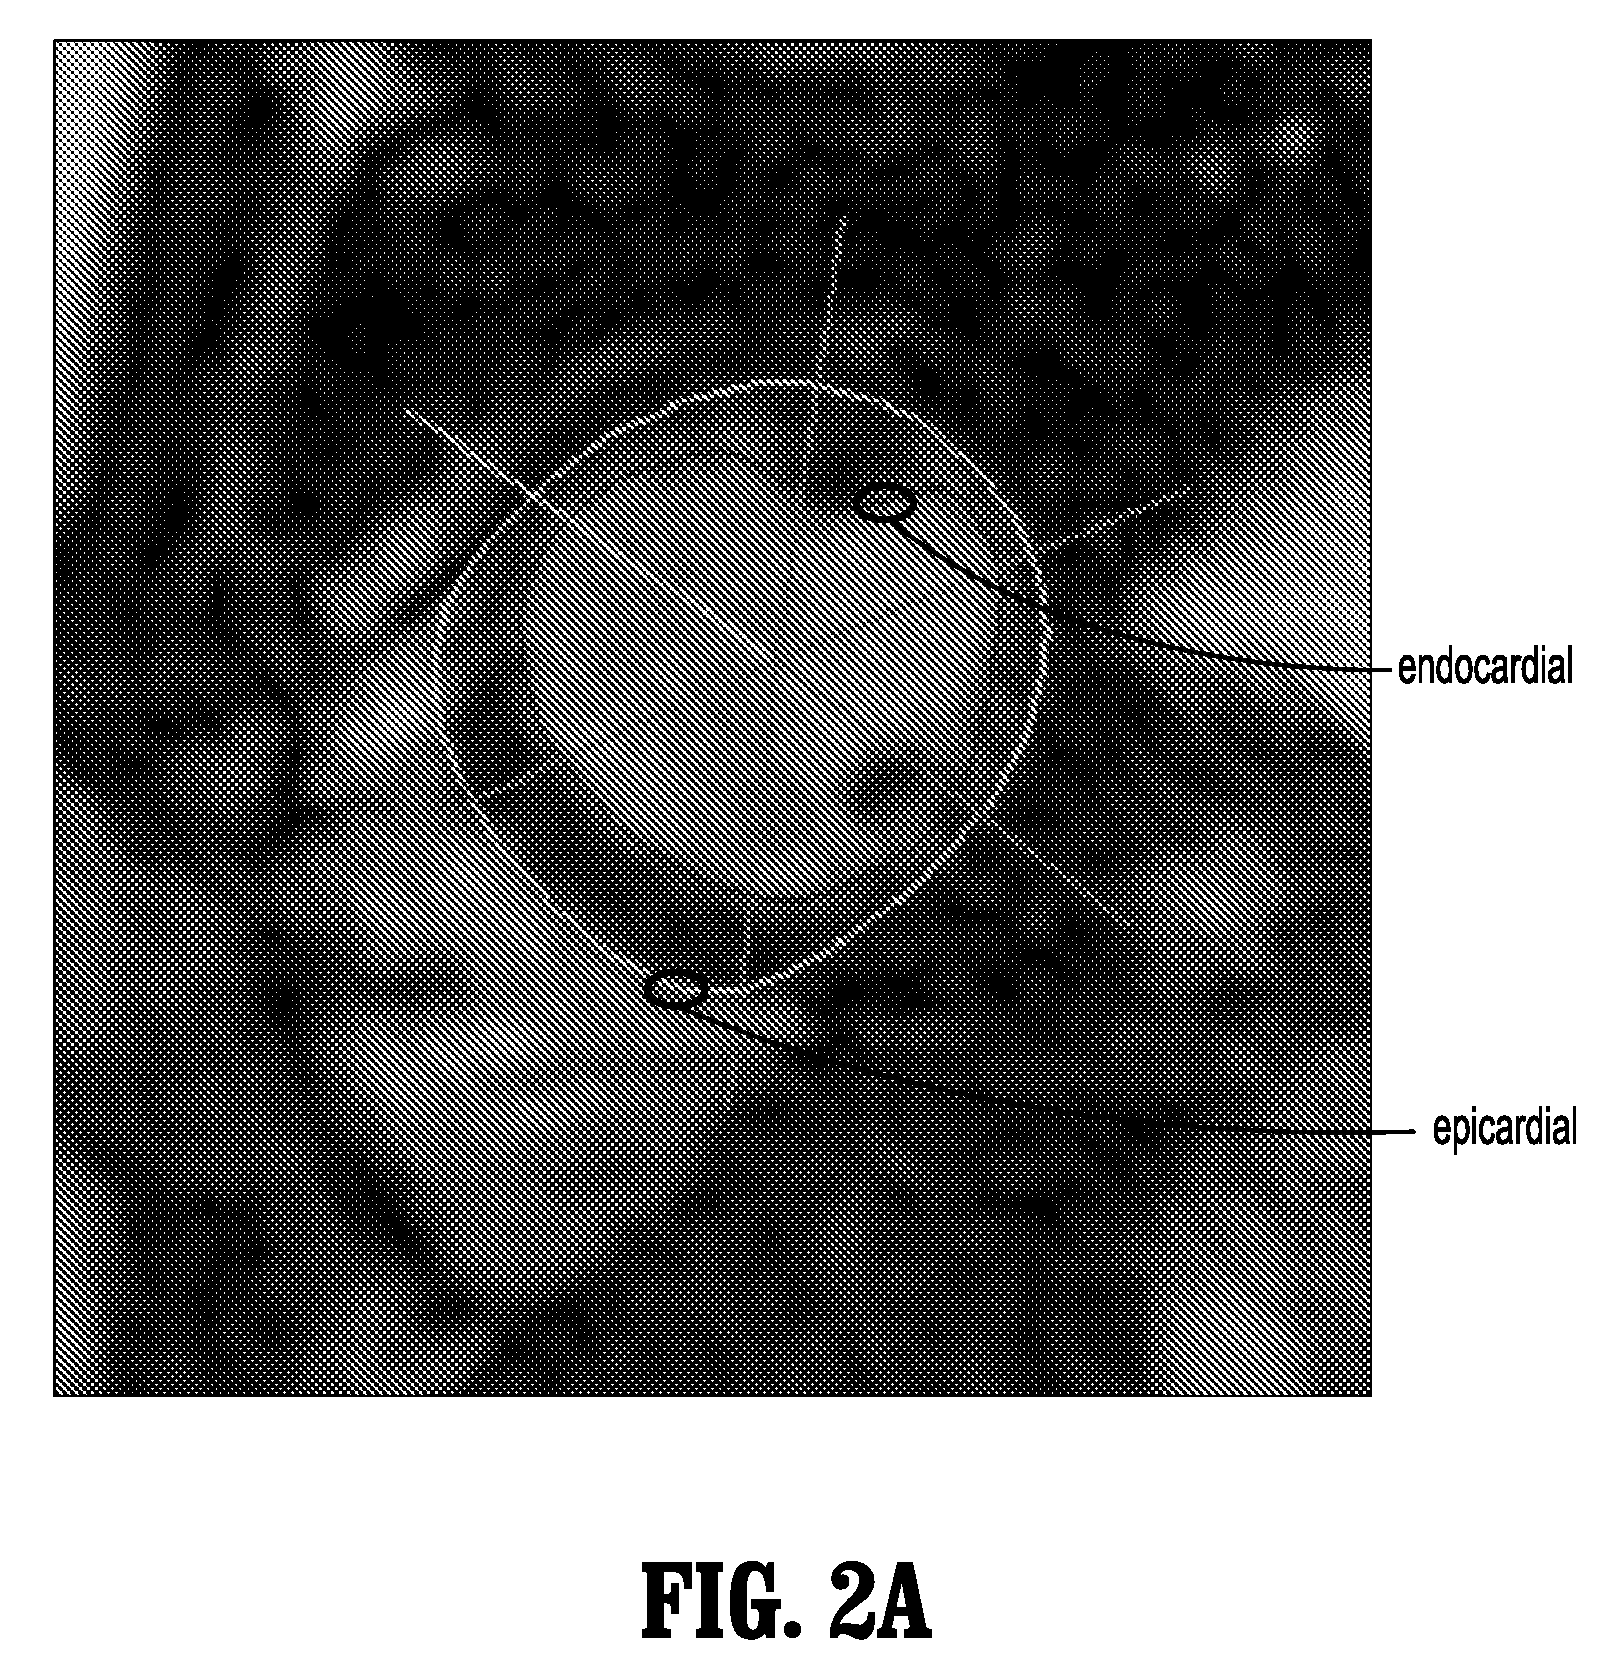 Method and system for monitoring cardiac function of a patient during a magnetic resonance imaging (MRI) procedure